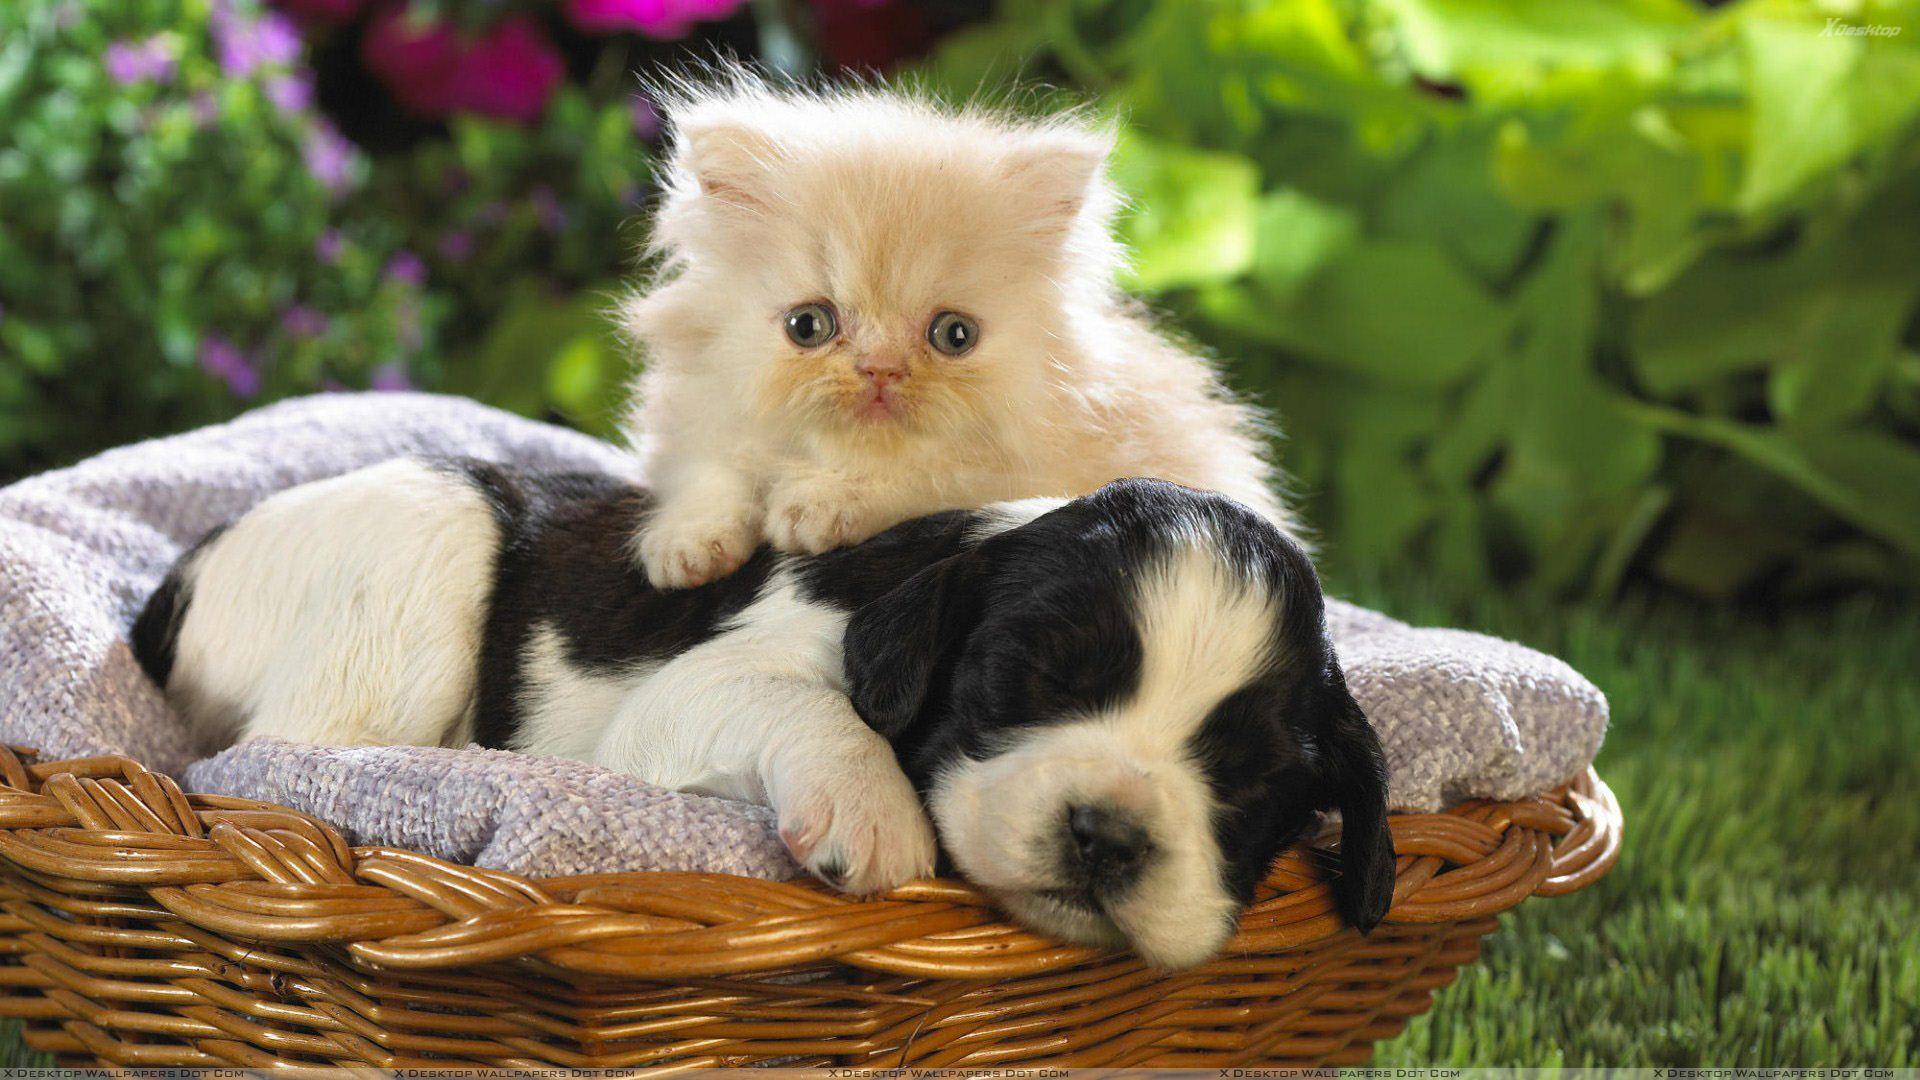 Cute Cats and Dogs Wallpaper